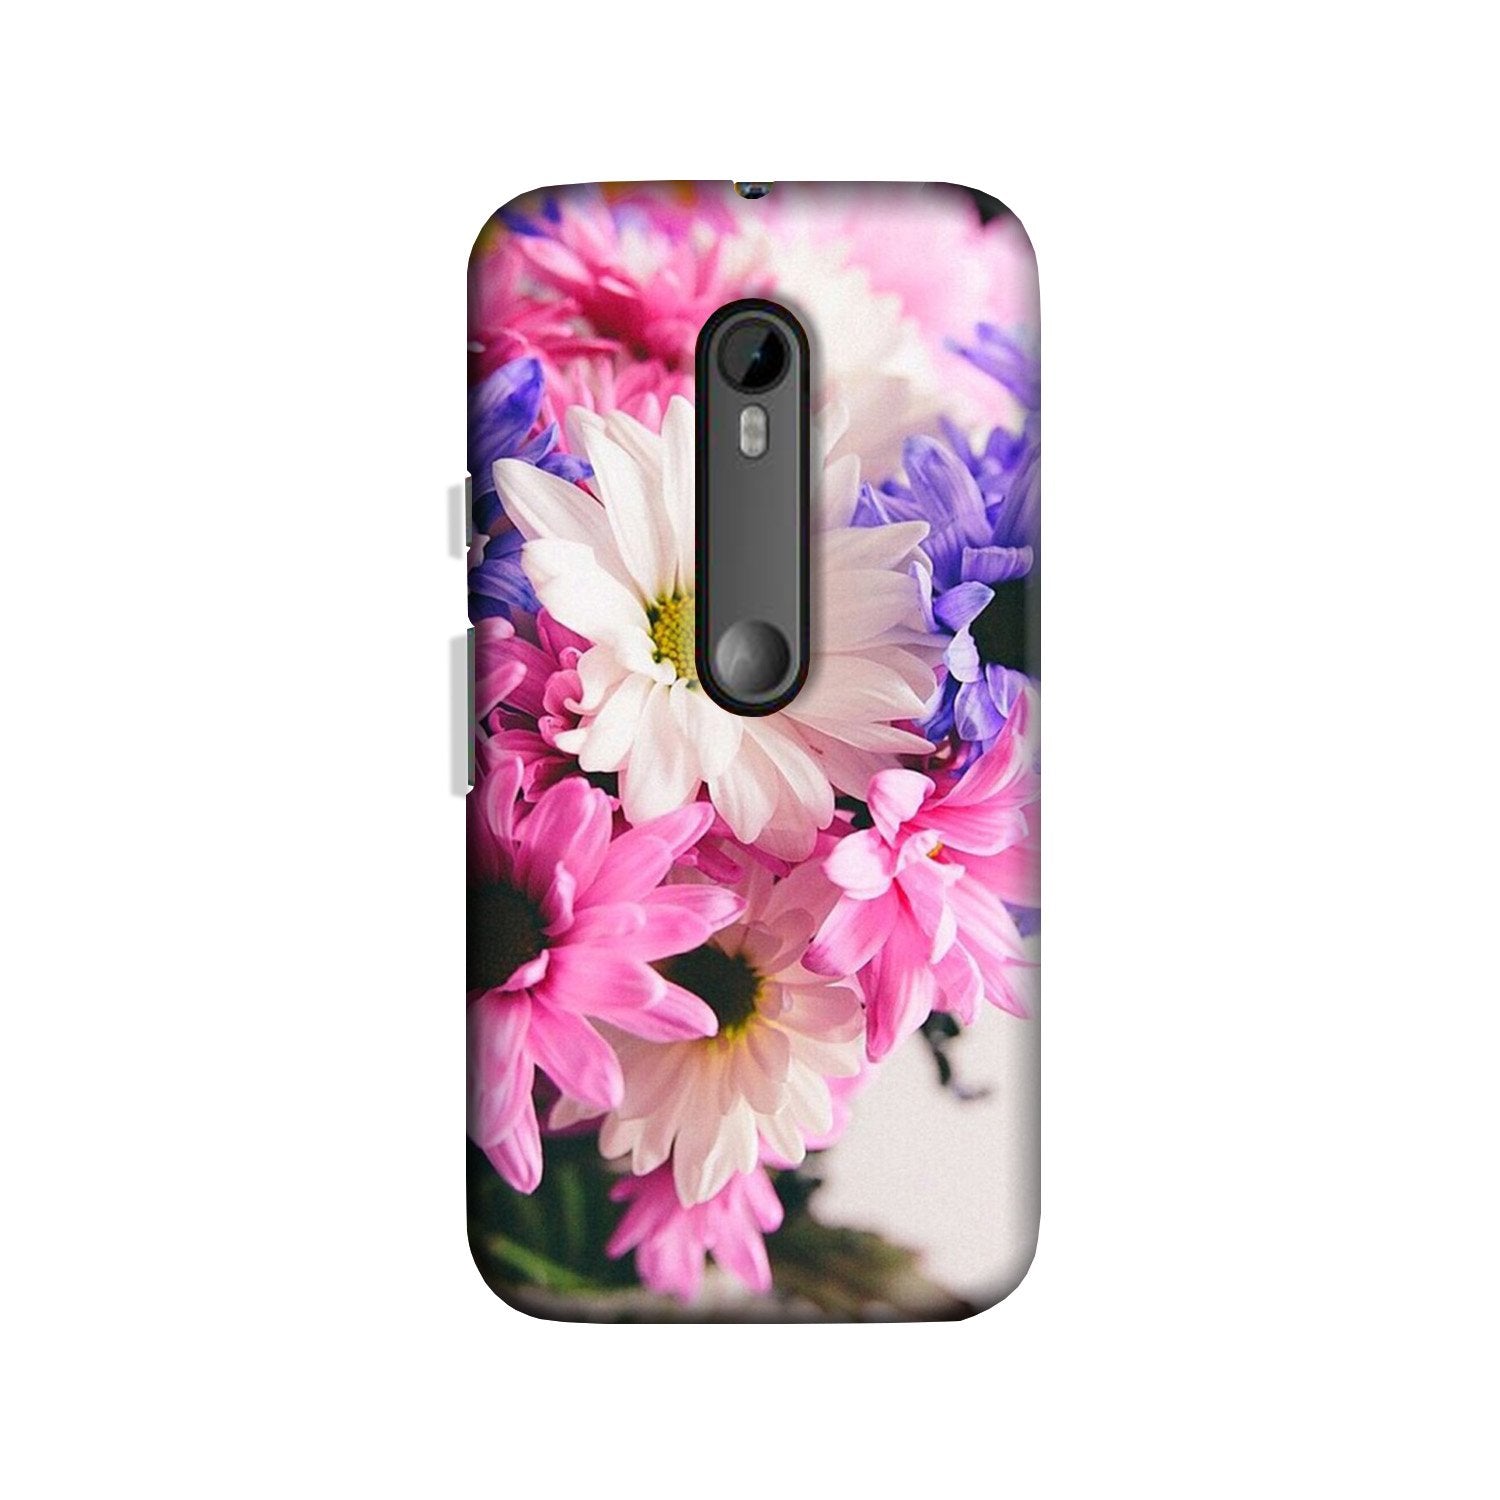 Coloful Daisy Case for Moto X Play